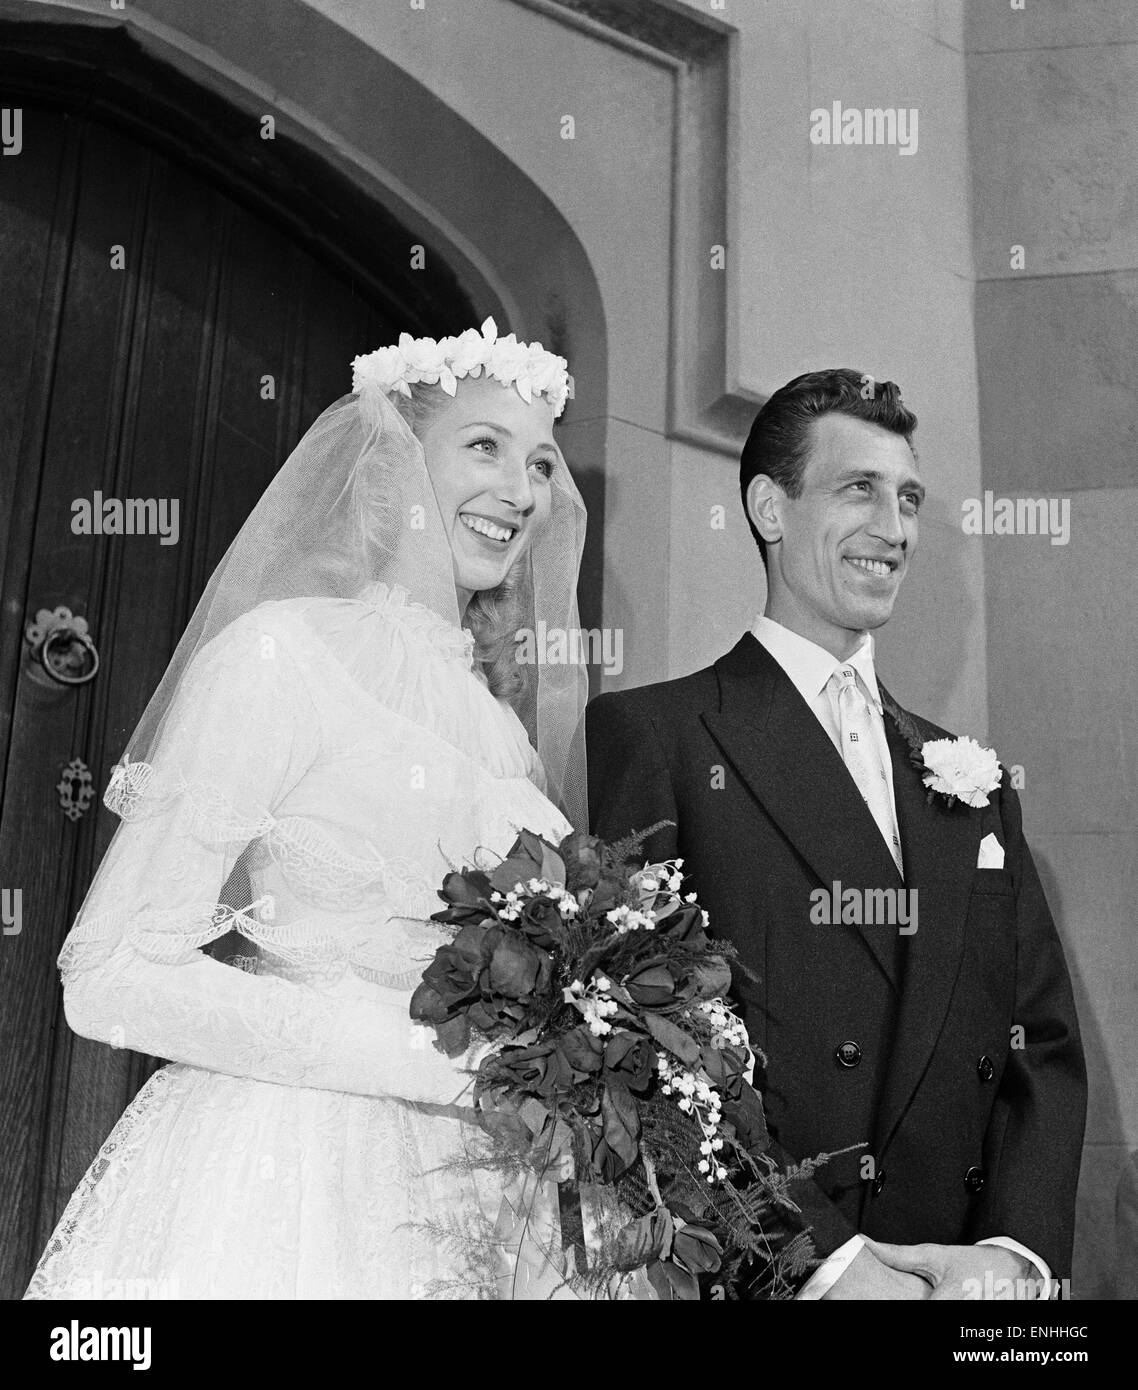 Bluebell Sheila Masters 22 weds frenchman Maurice Brerot in Birmingham, 3rd September 1955. Sheila Masters, is a member of the famous dance troupe, the Bluebell Girls at Le Lido on the Champs-Elysees in Paris, France. Stock Photo